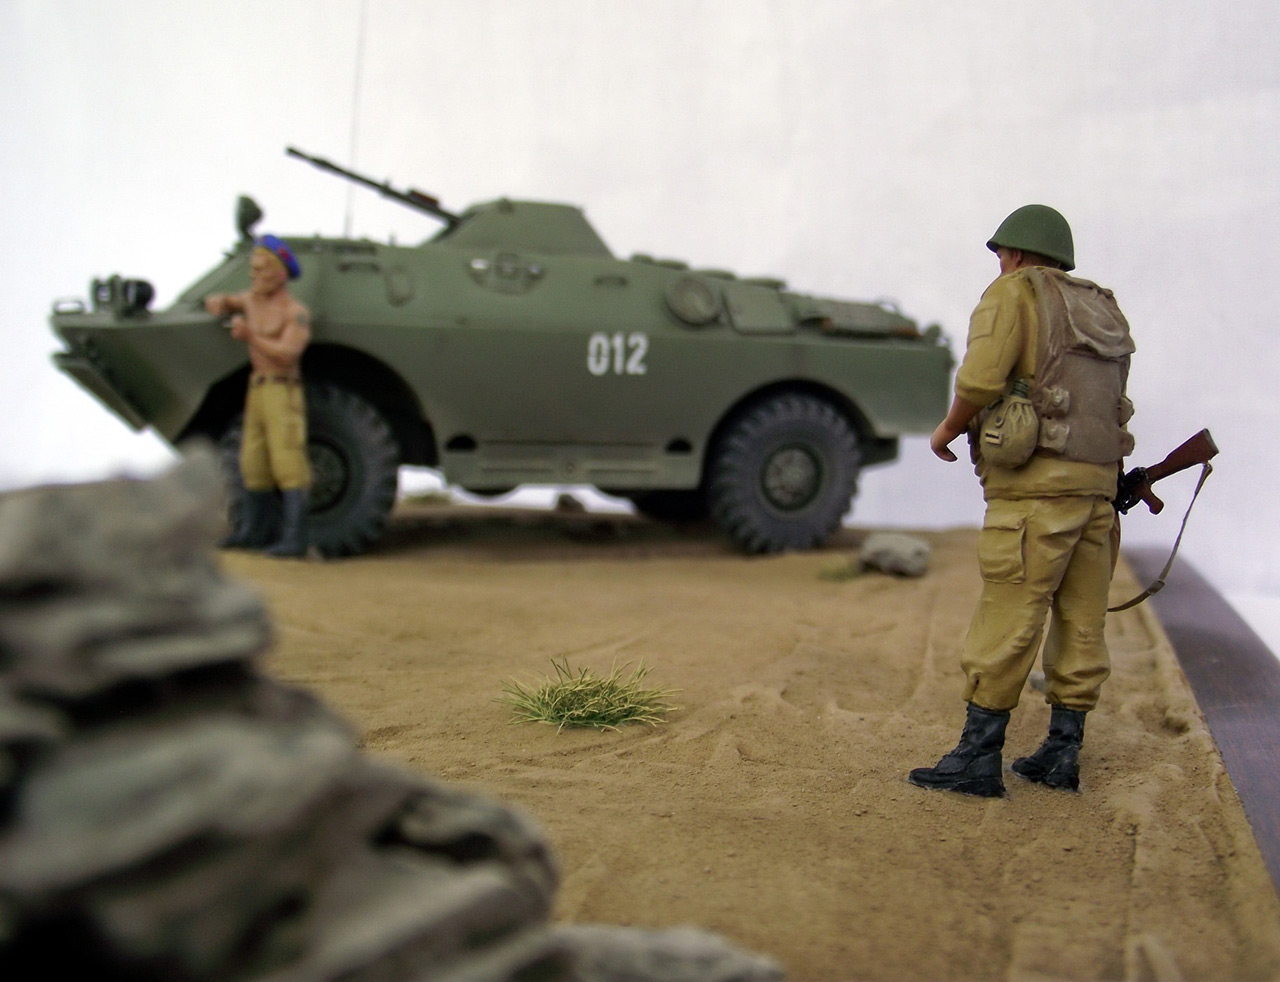 Dioramas and Vignettes: Demobilization is soon!, photo #30